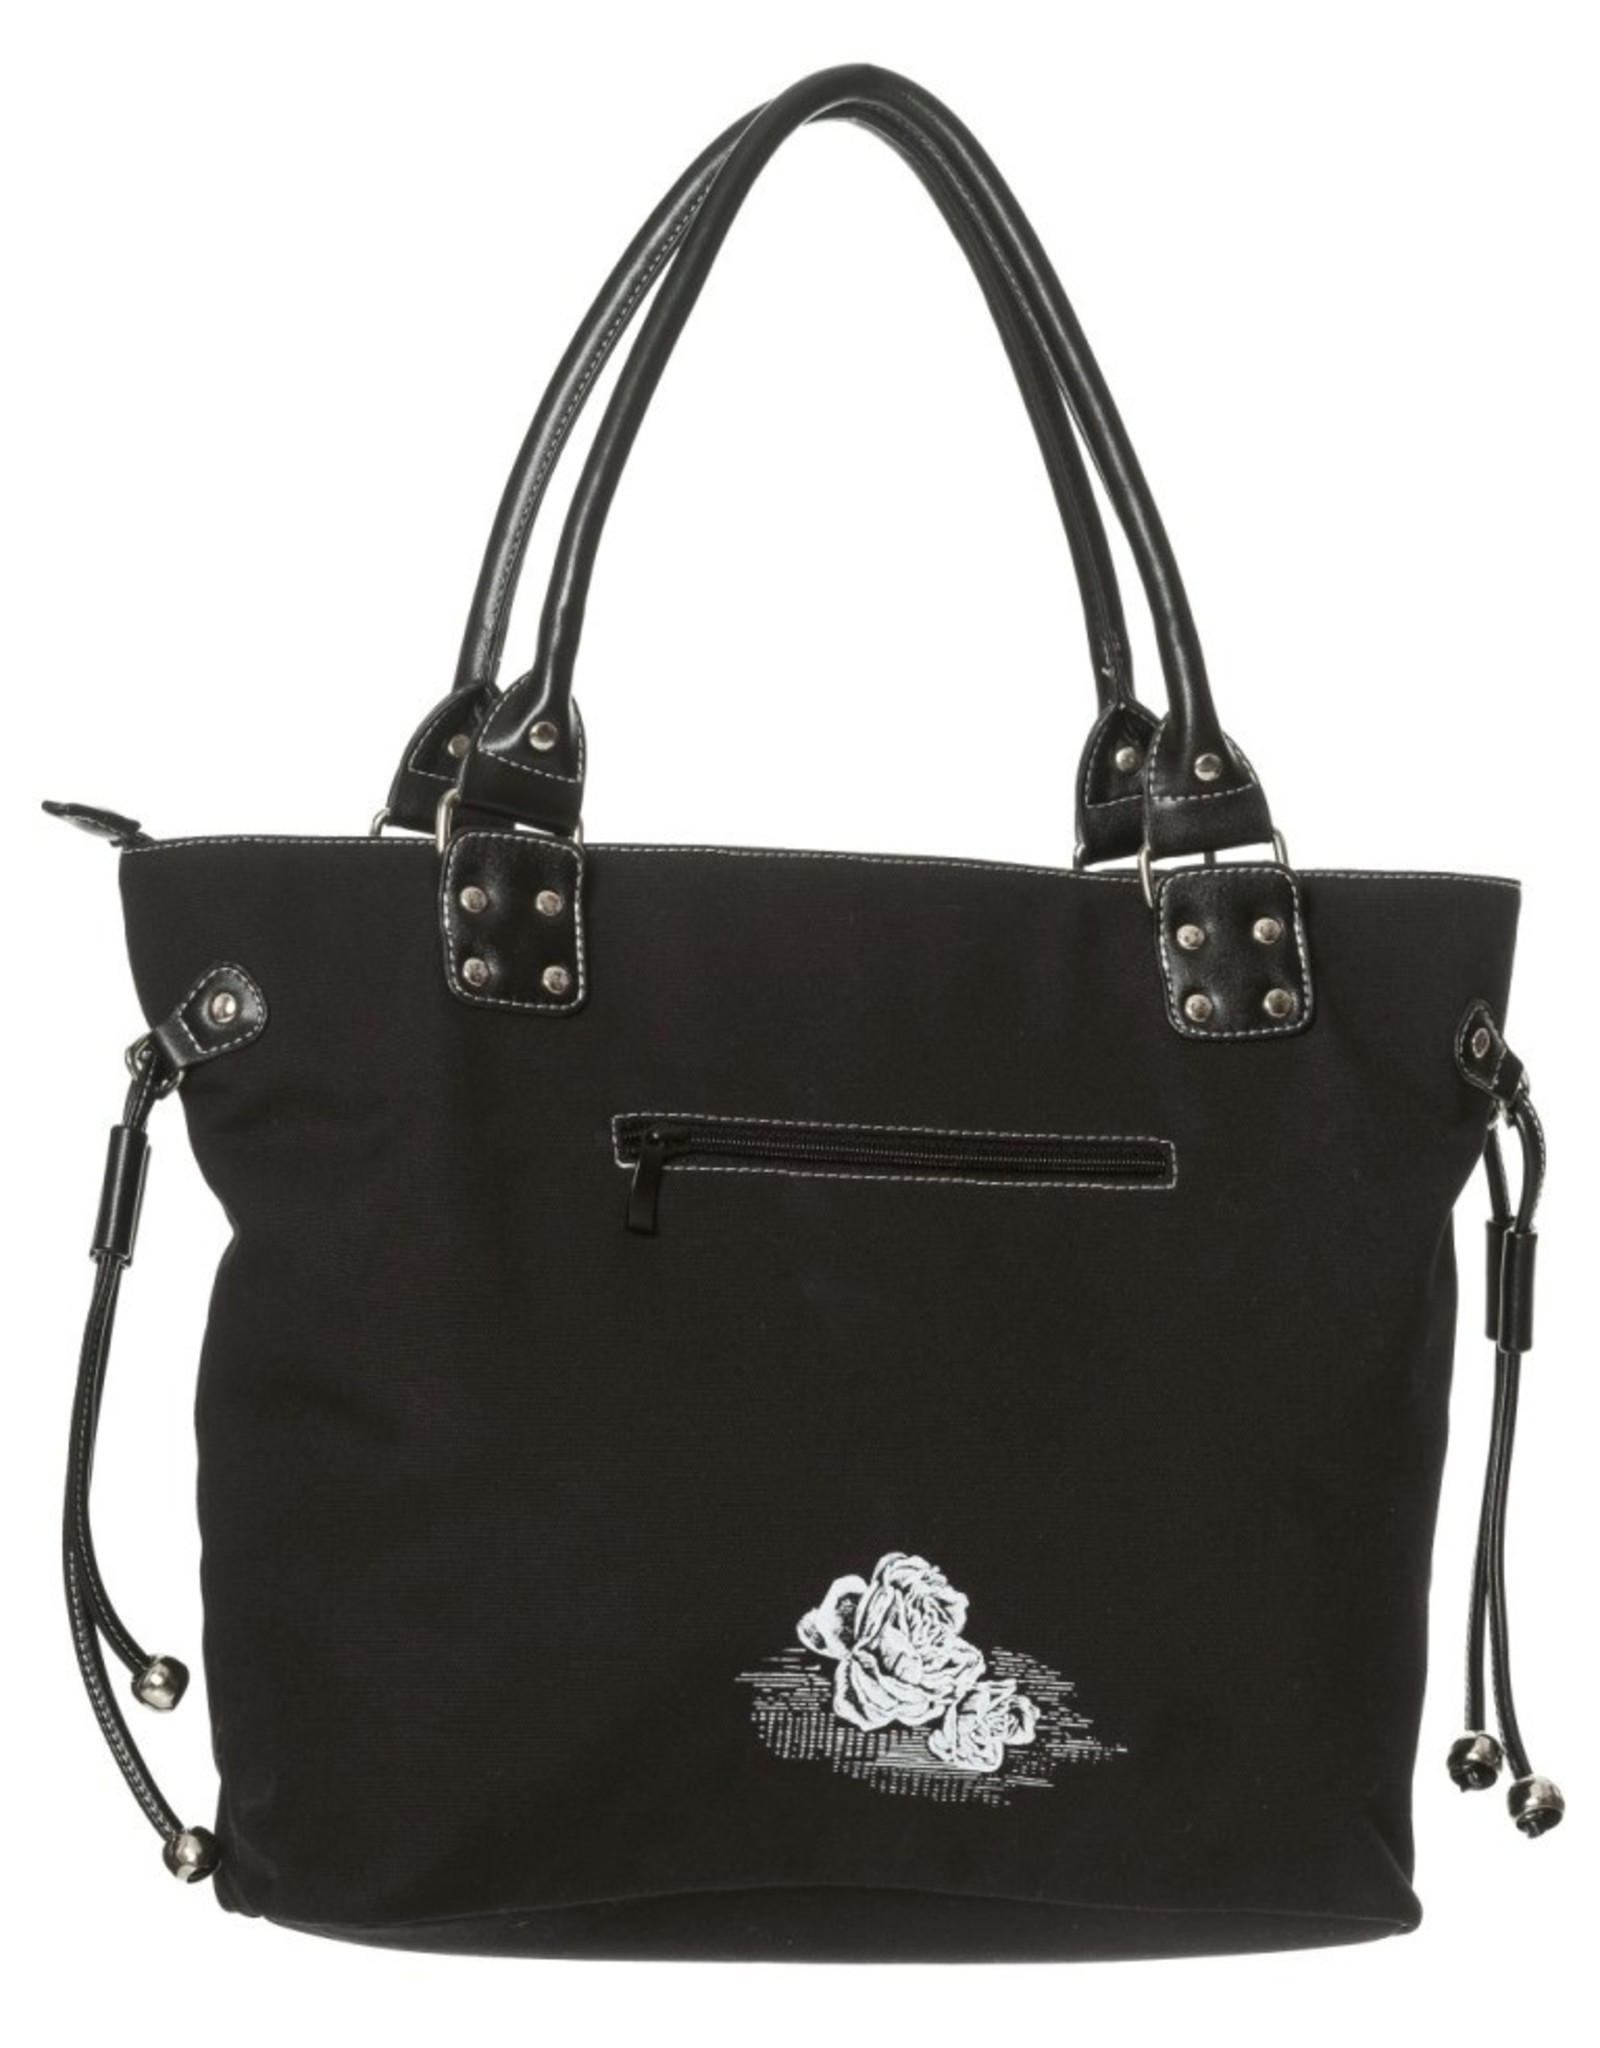 Banned Gothic bags Steampunk bags - Banned Back in Black Skulls Tote Bag